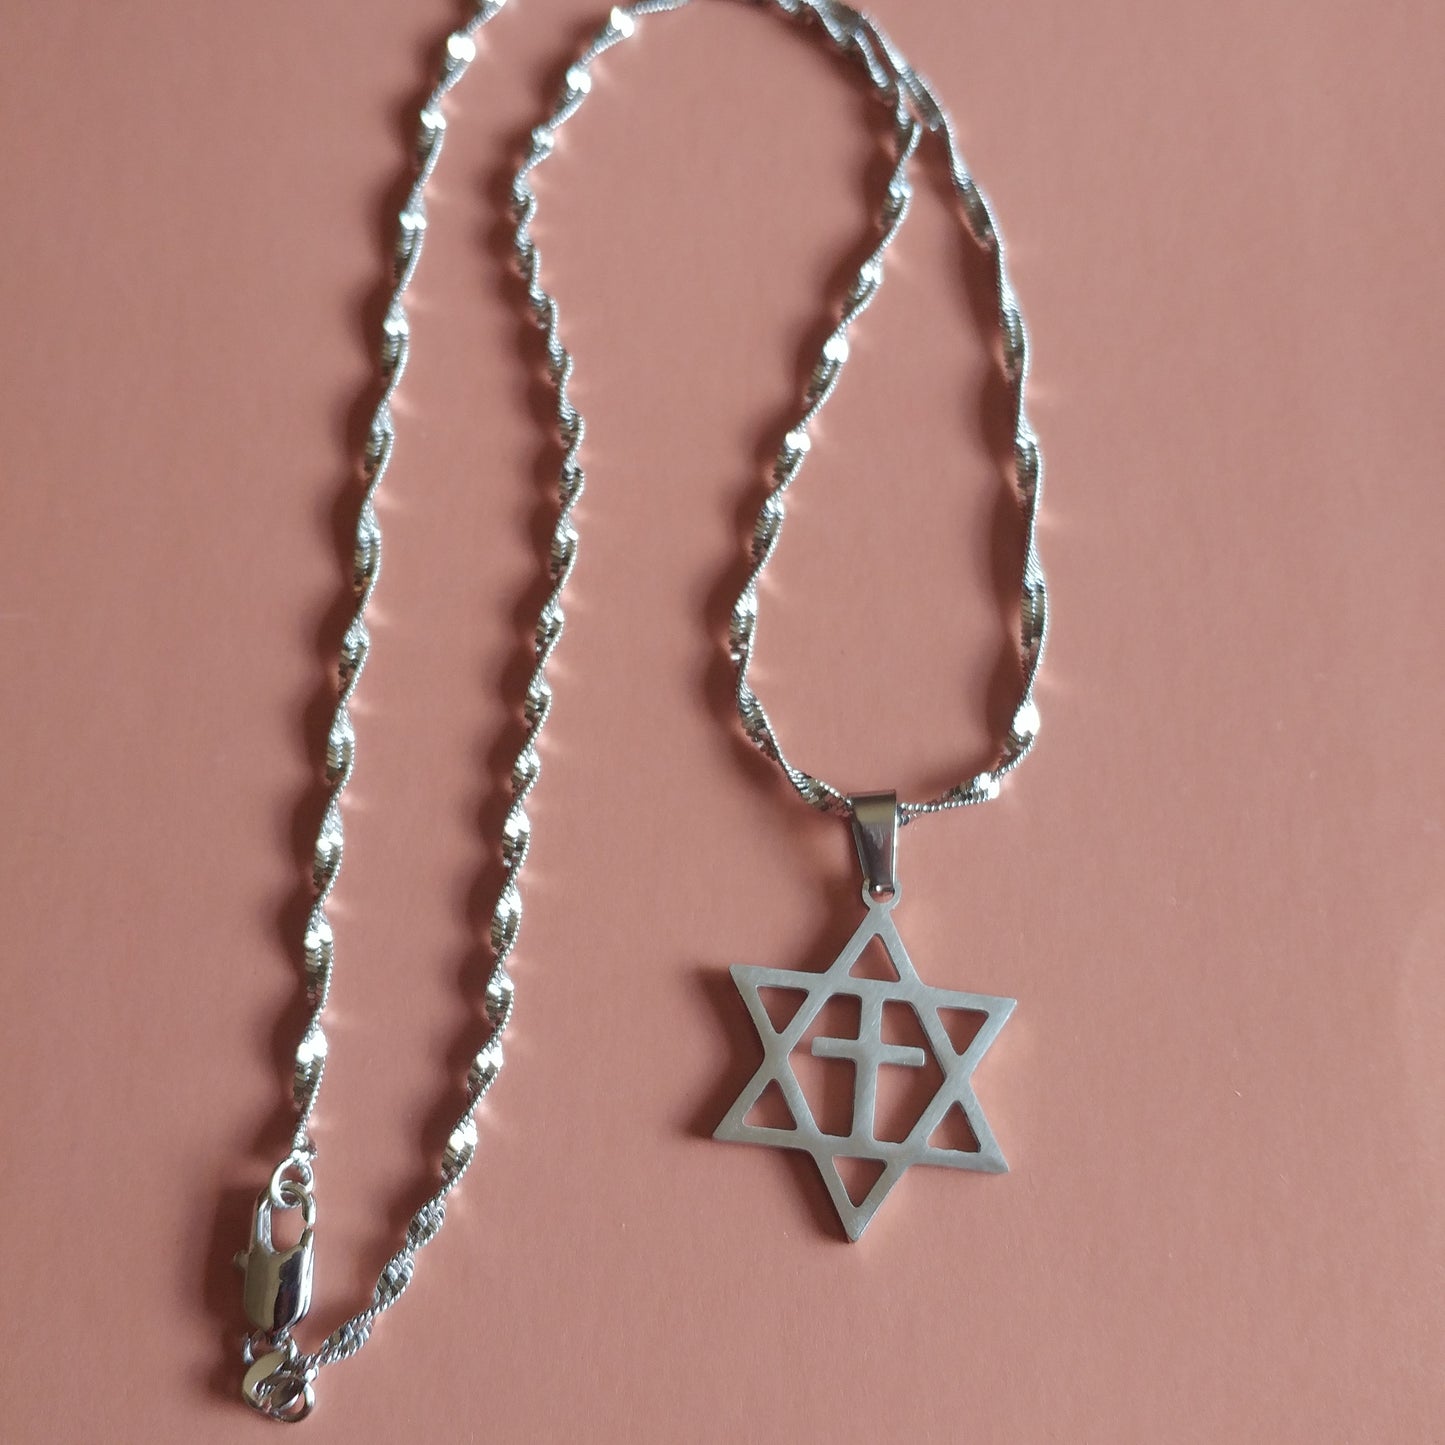 Jewish Star with cross Necklace - Silver Tone